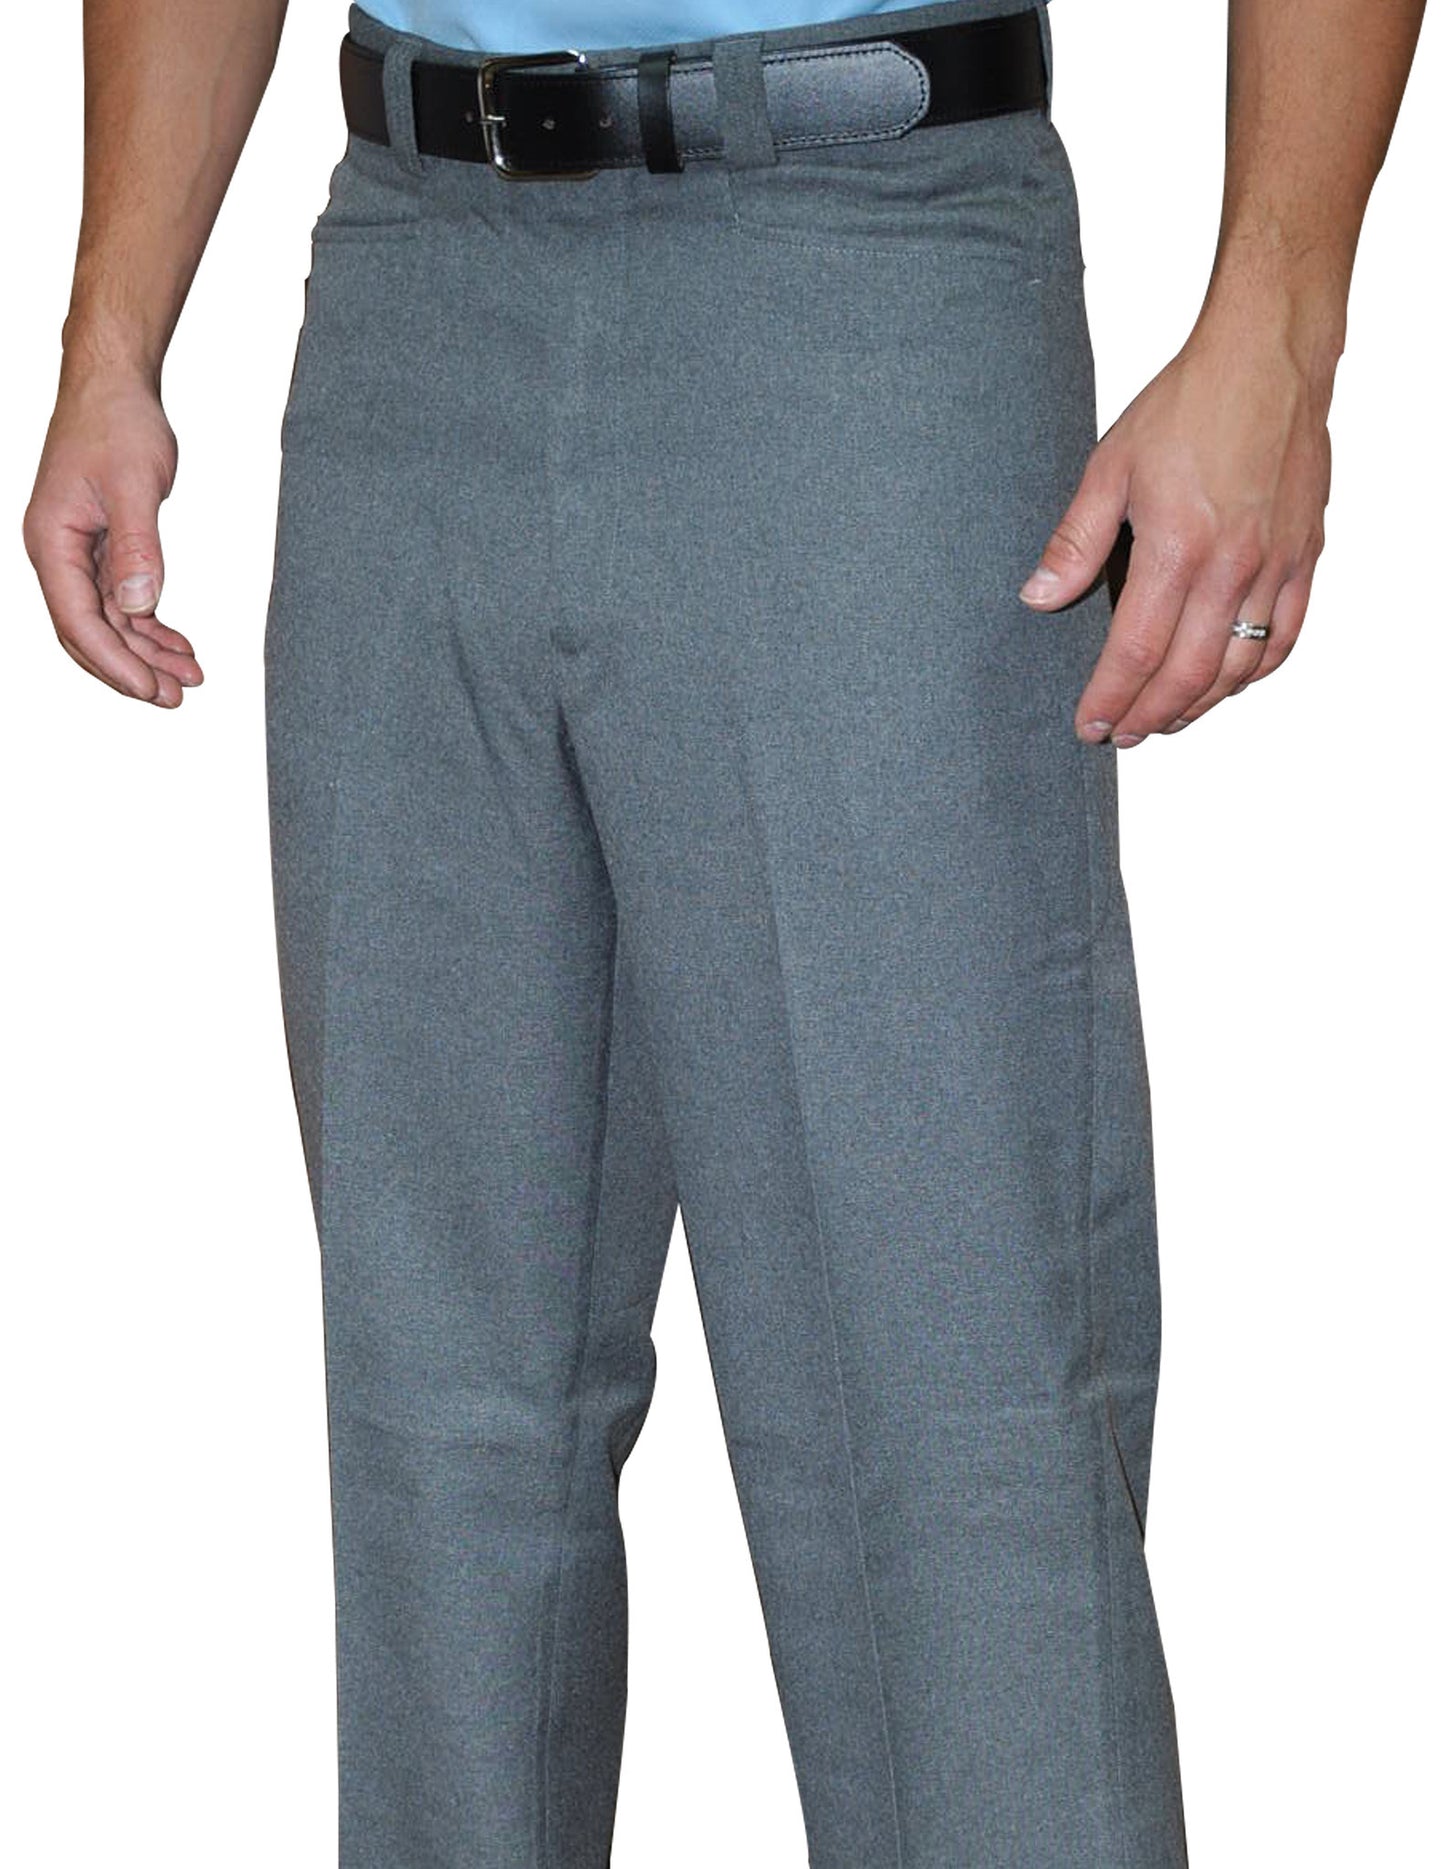 BBS377-Smitty Flat Front Combo Pants - Available in Heather Grey and Navy